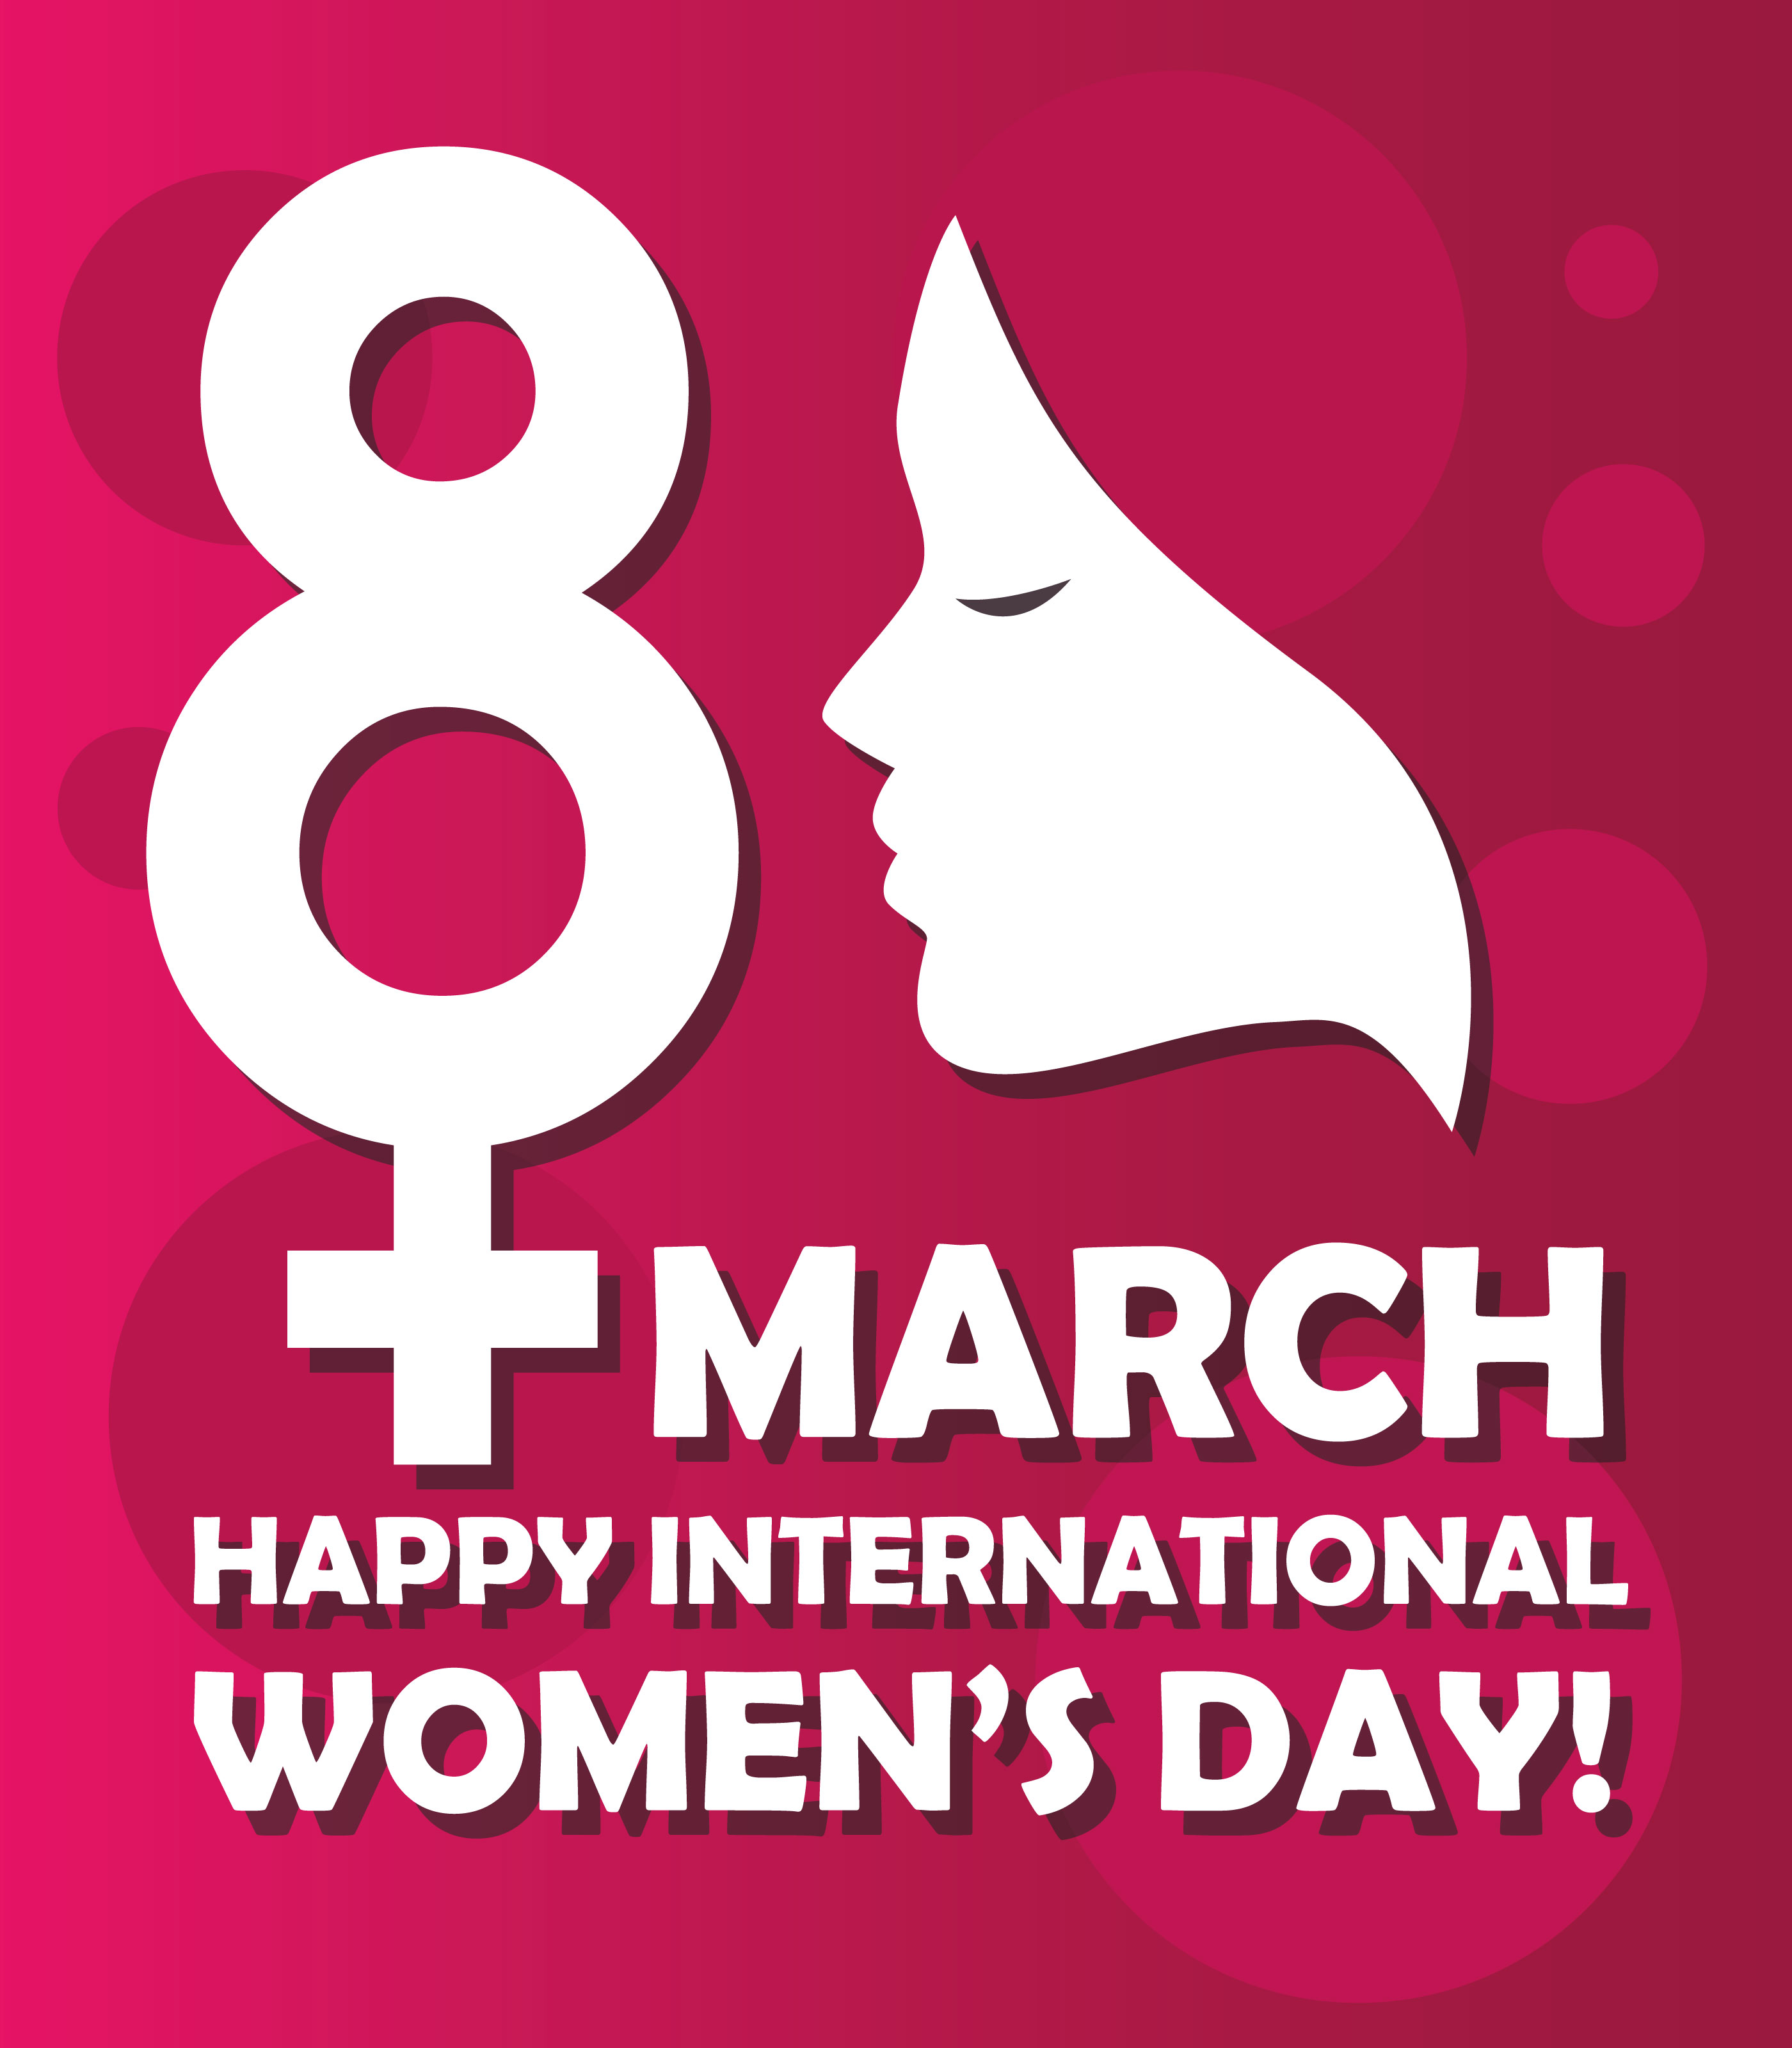 Happy Womens Day Png Creative design of happy women's day celebration